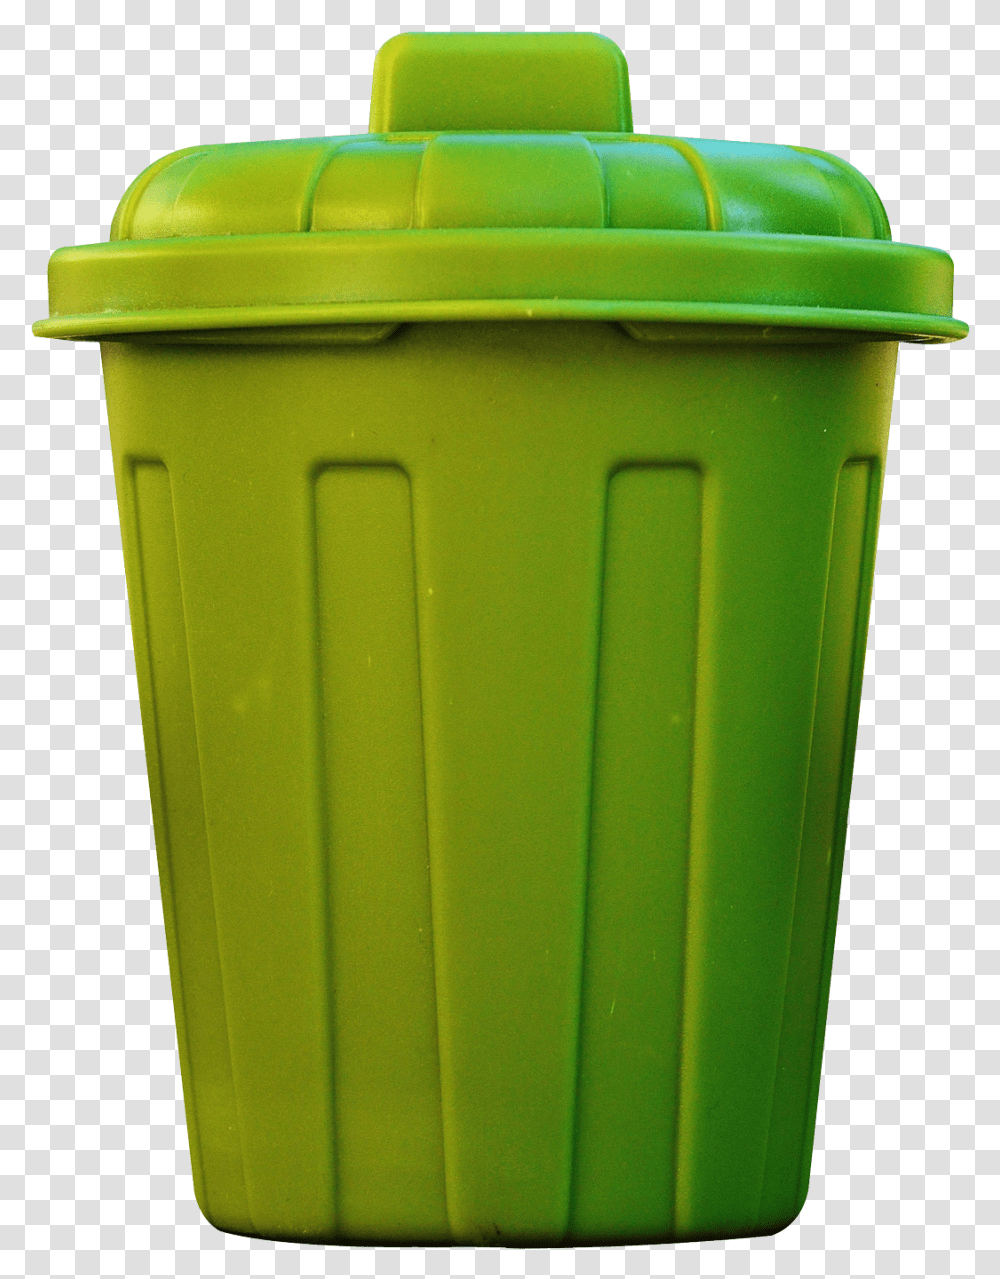 Download For Free Recycle Bin Image, Mailbox, Letterbox, Tin, Trash Can Transparent Png